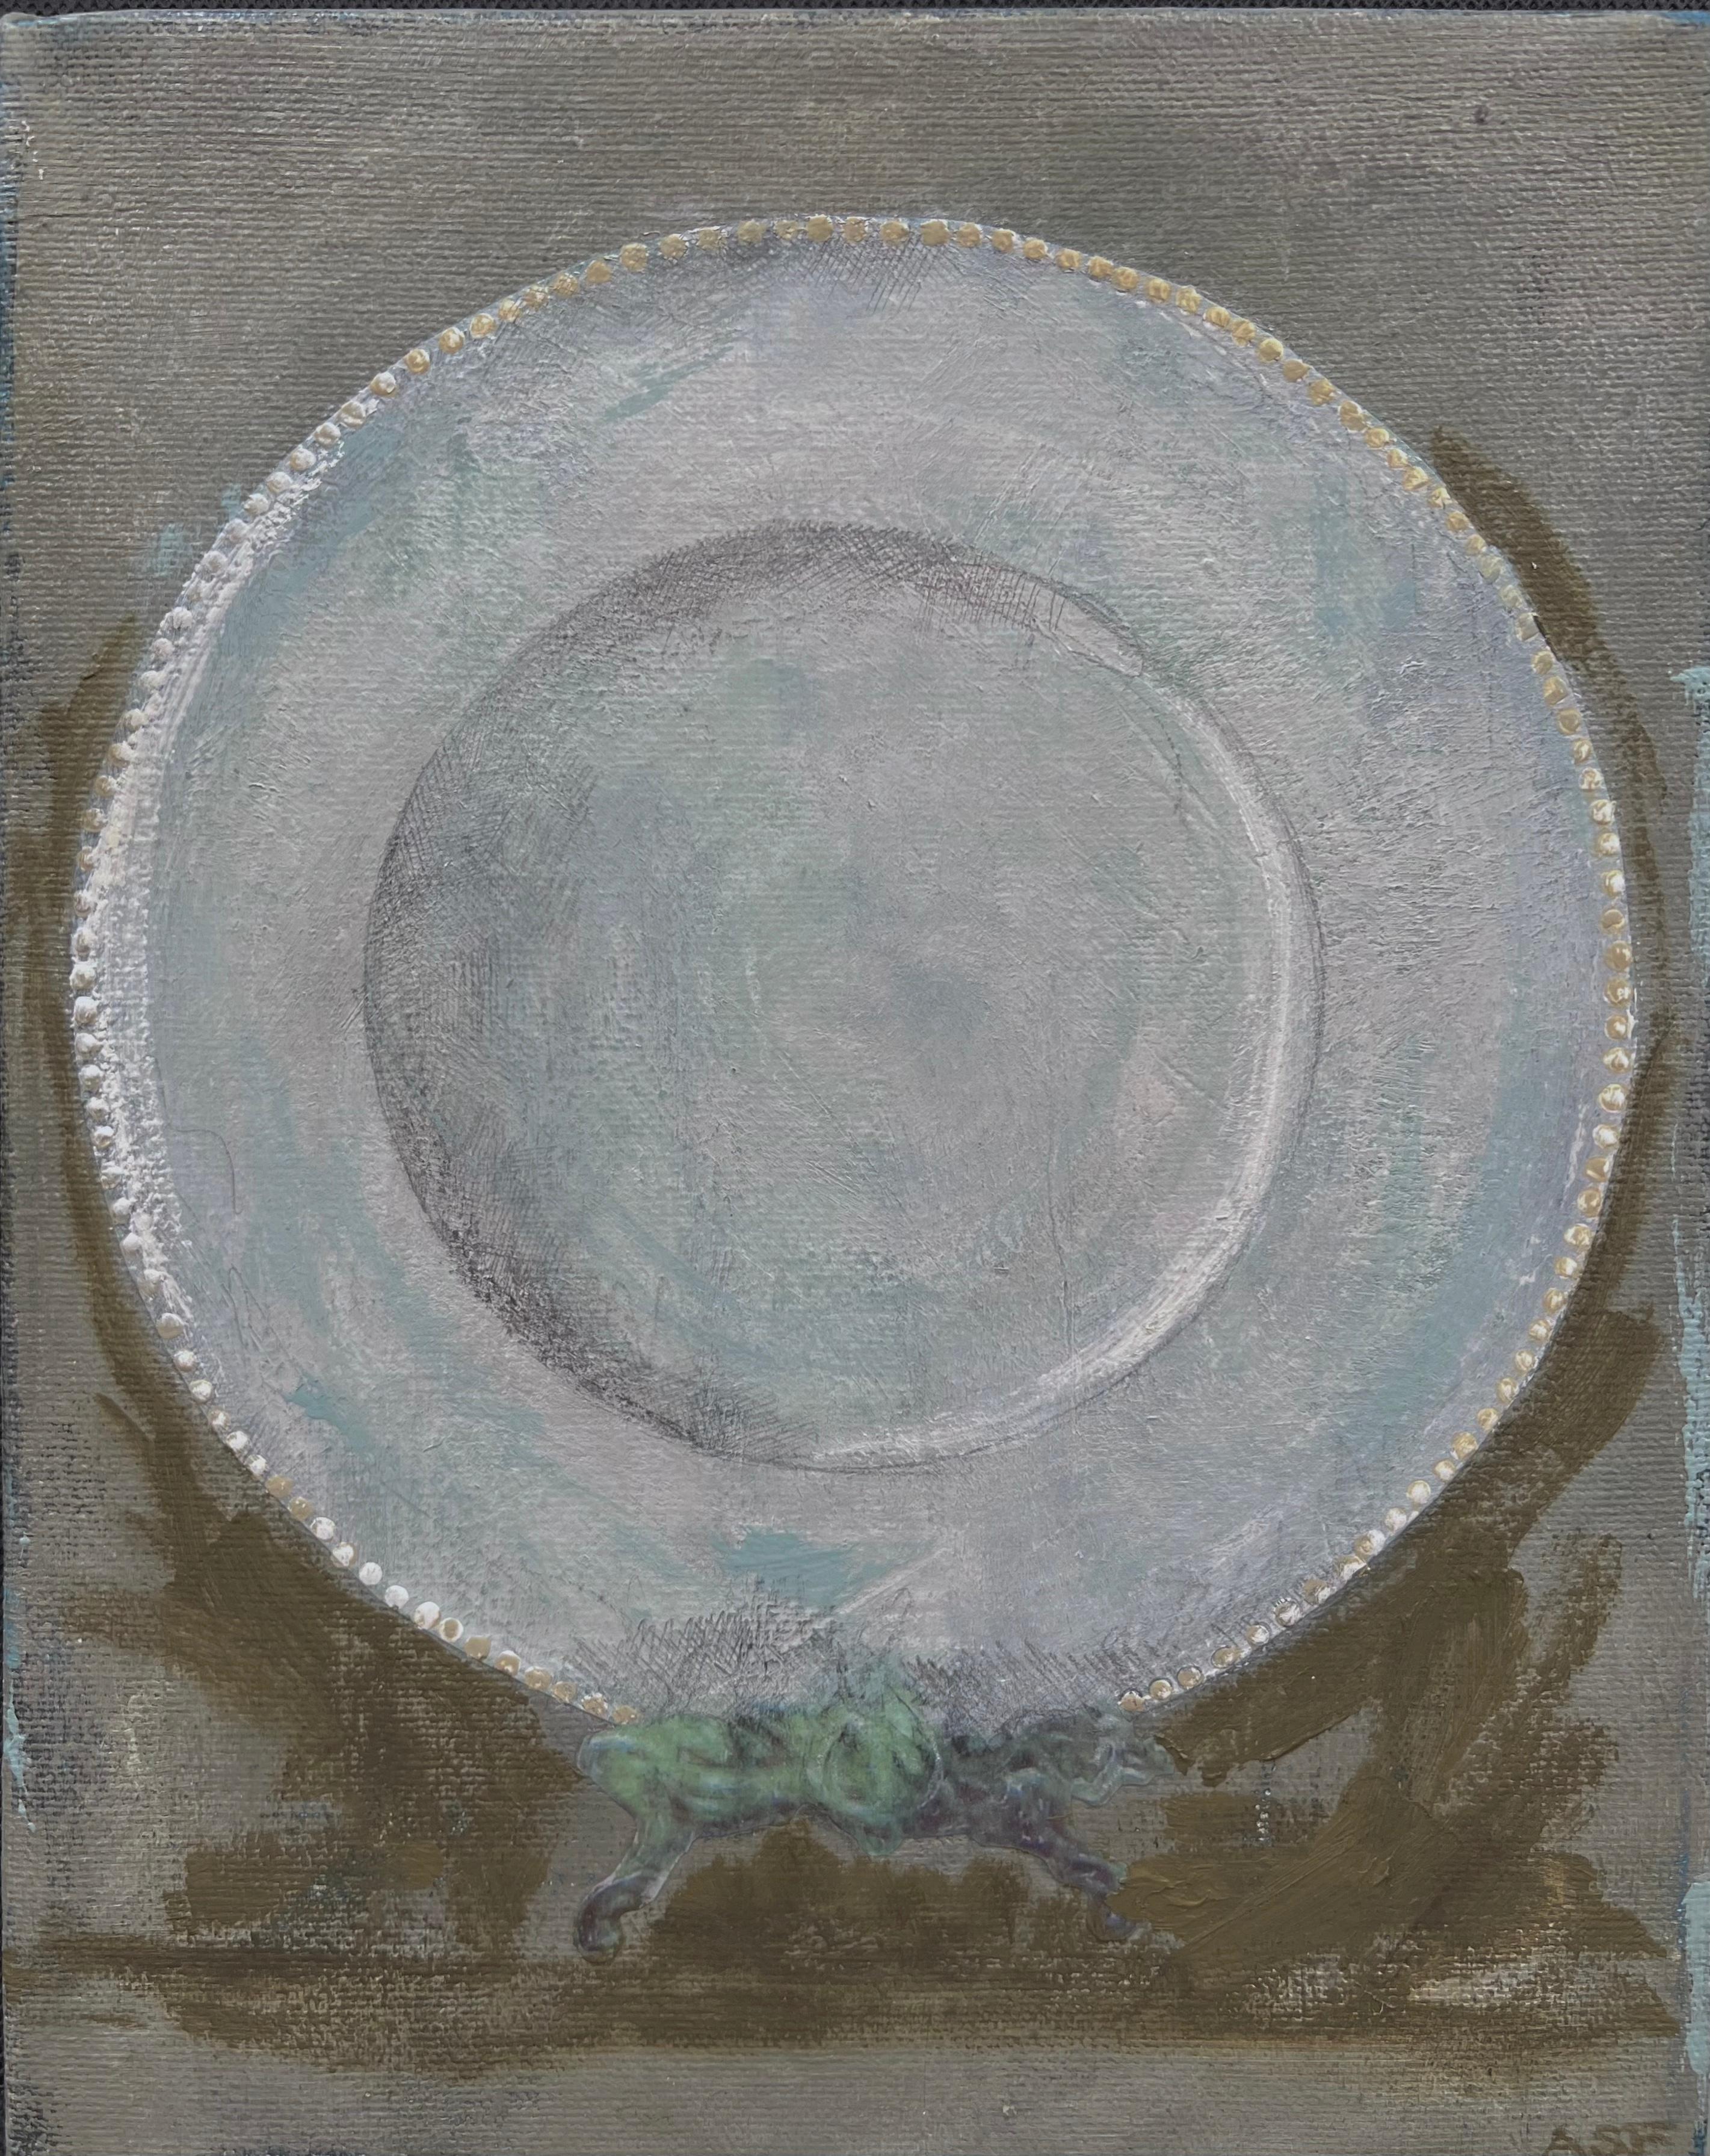 Dinner Plate 1 (8"x10", Still Life Painting On Canvas, Muted Green, White)